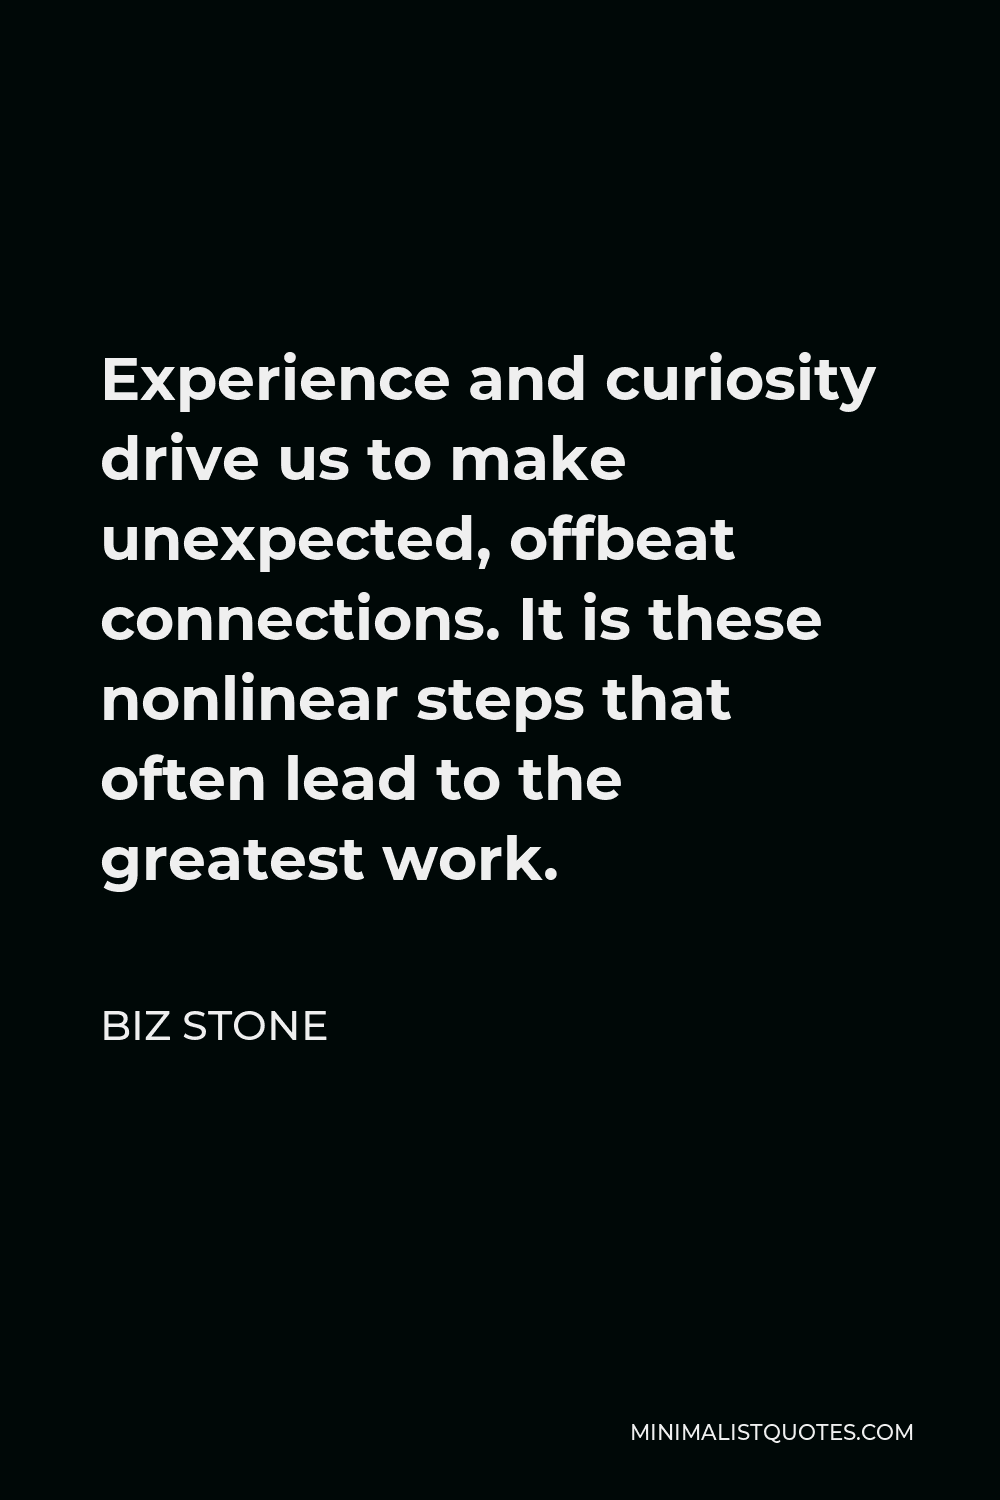 Biz Stone Quote - Experience and curiosity drive us to make unexpected, offbeat connections. It is these nonlinear steps that often lead to the greatest work.